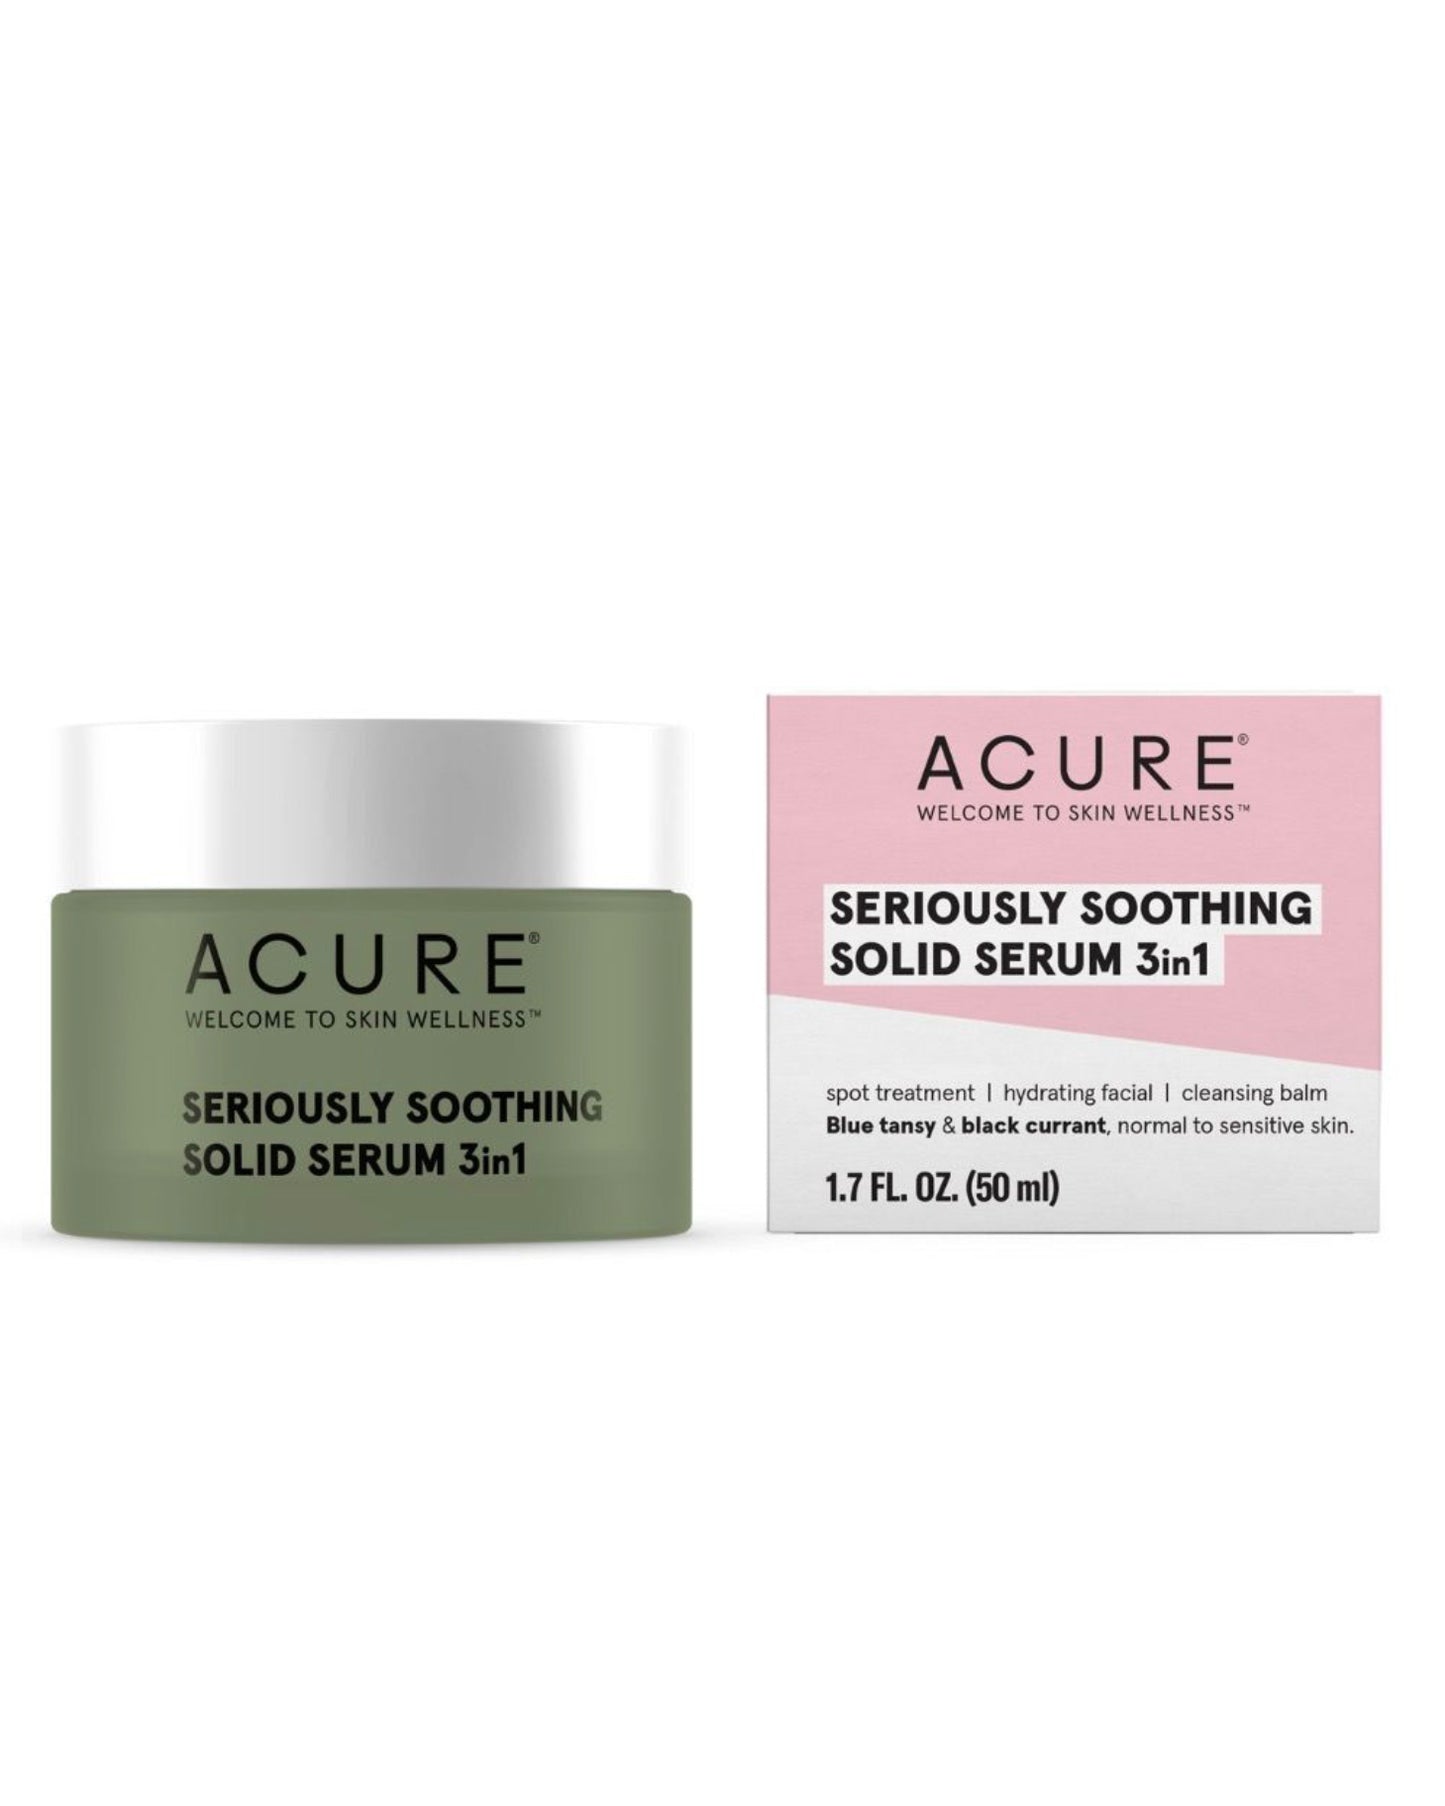 Acure Seriously Soothing Solid Serum 3 in 1 50ml